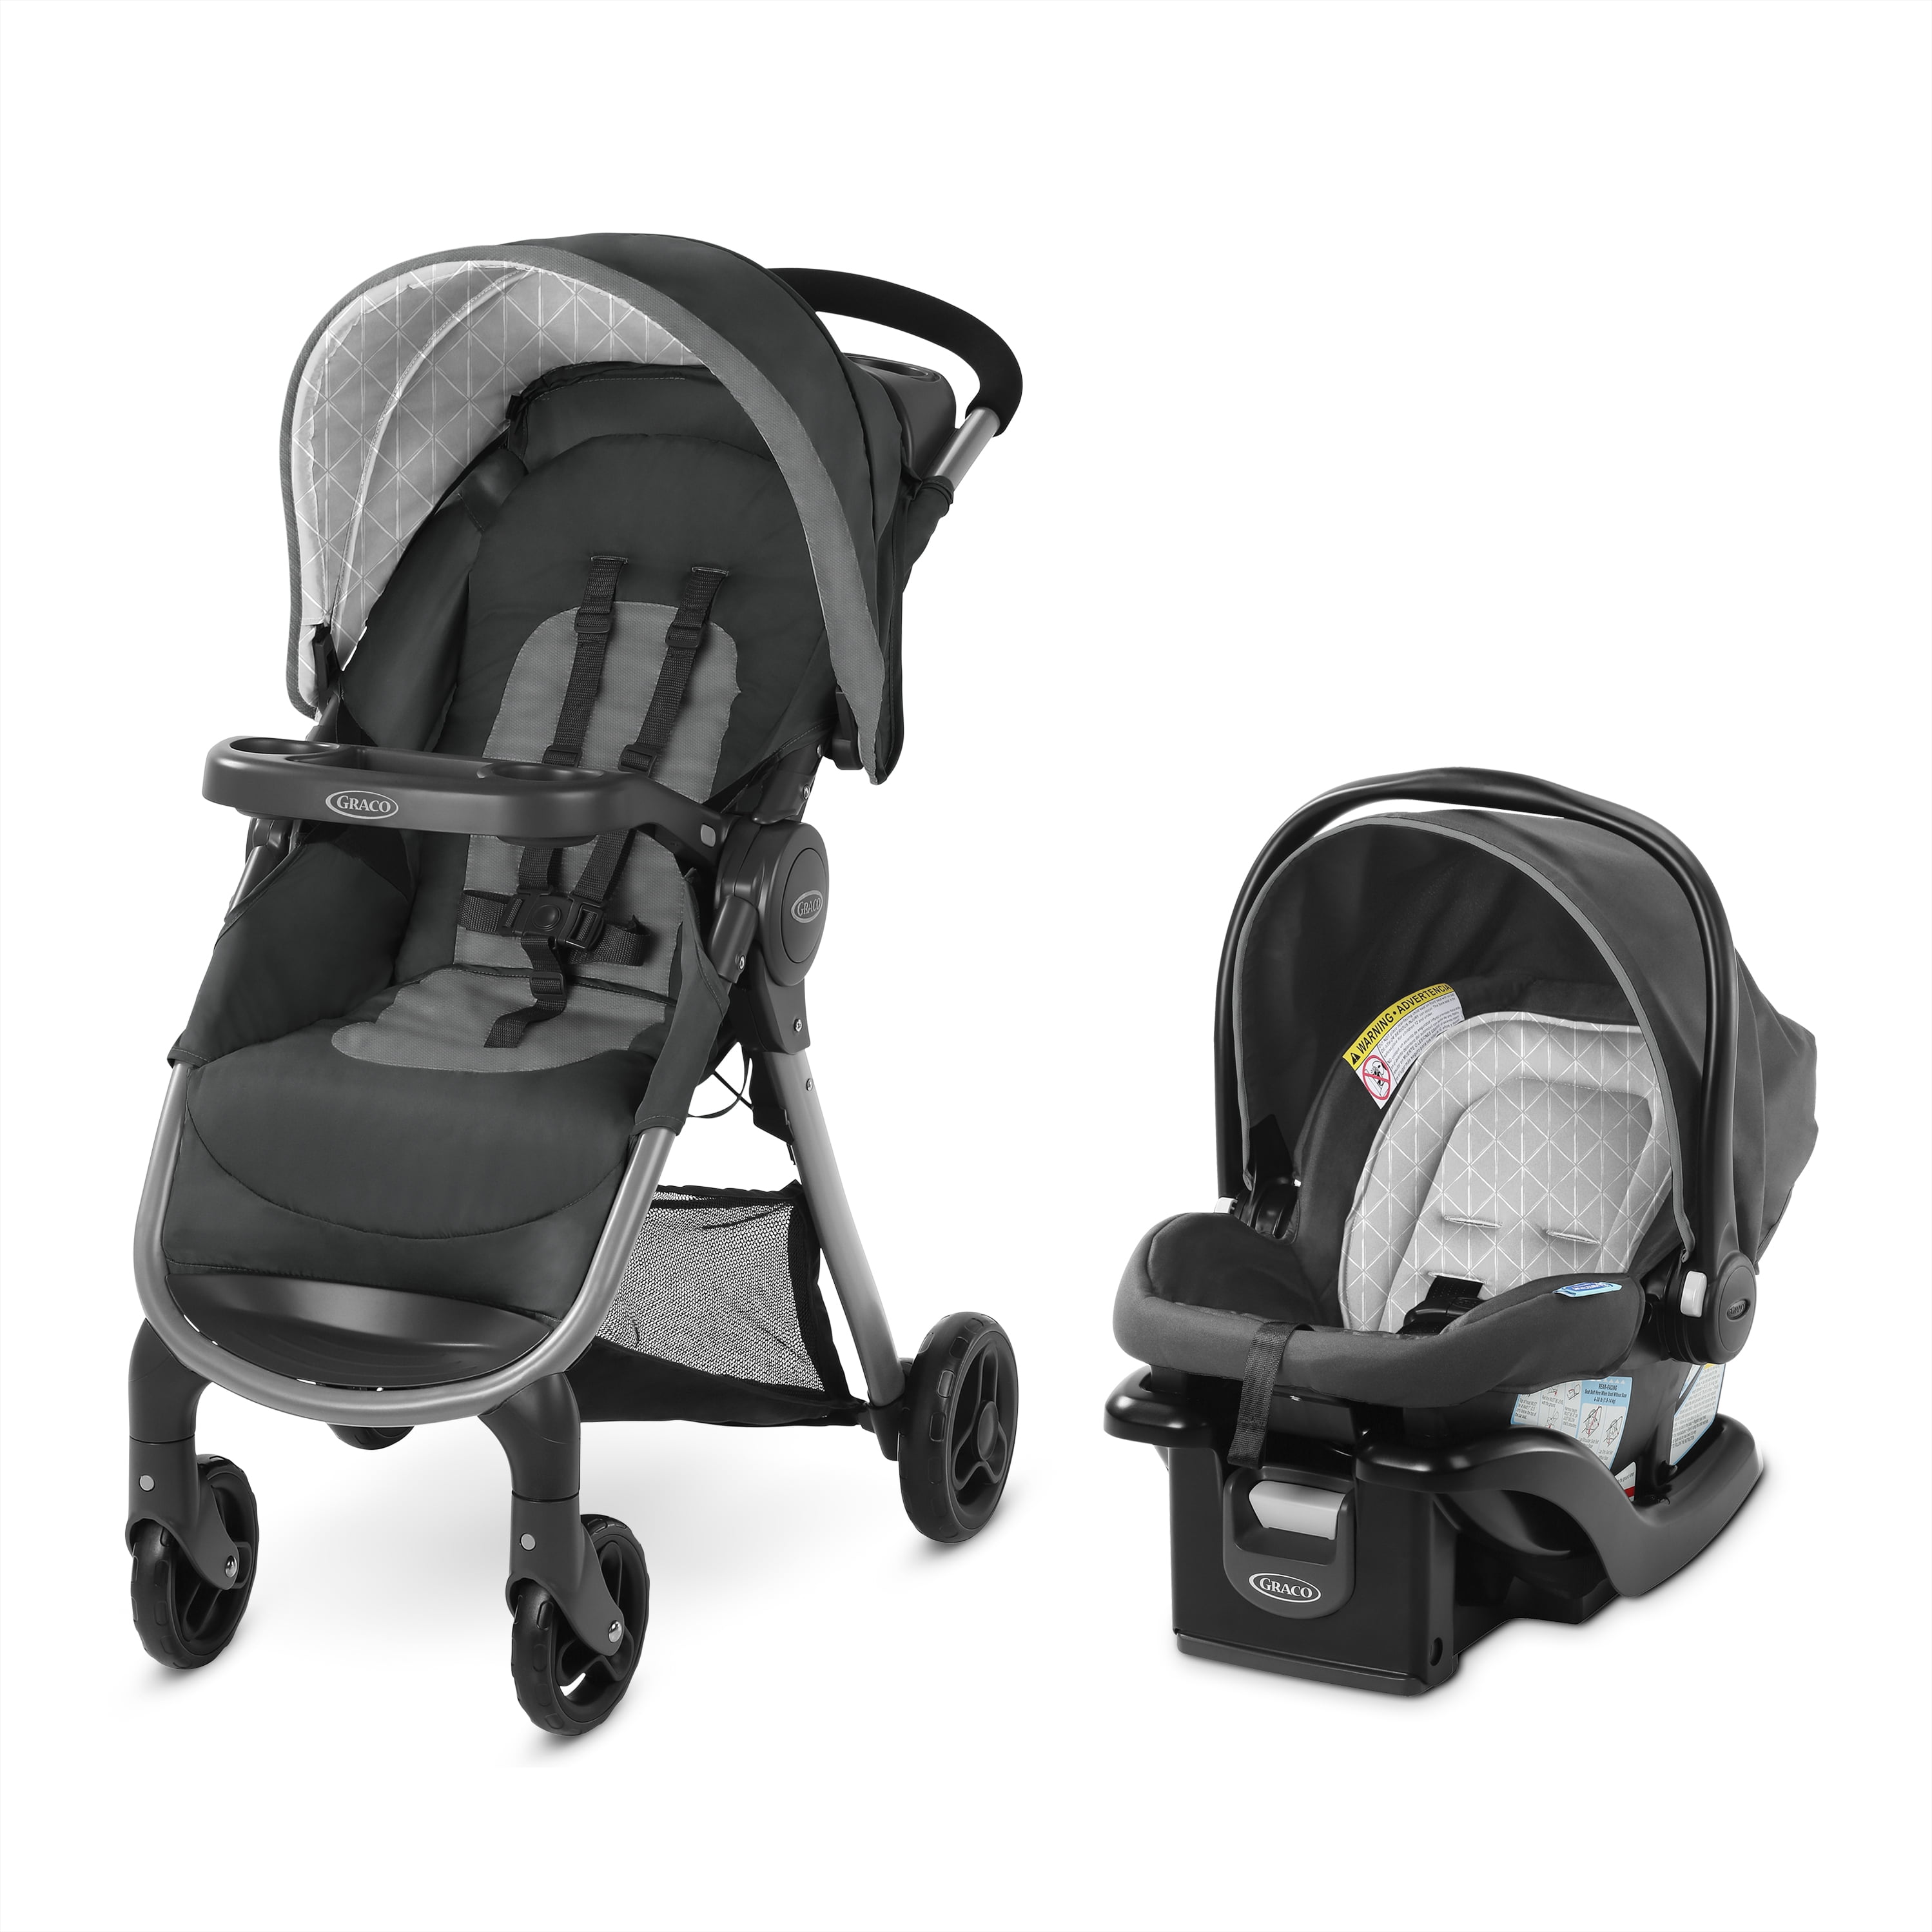 graco travel system used price